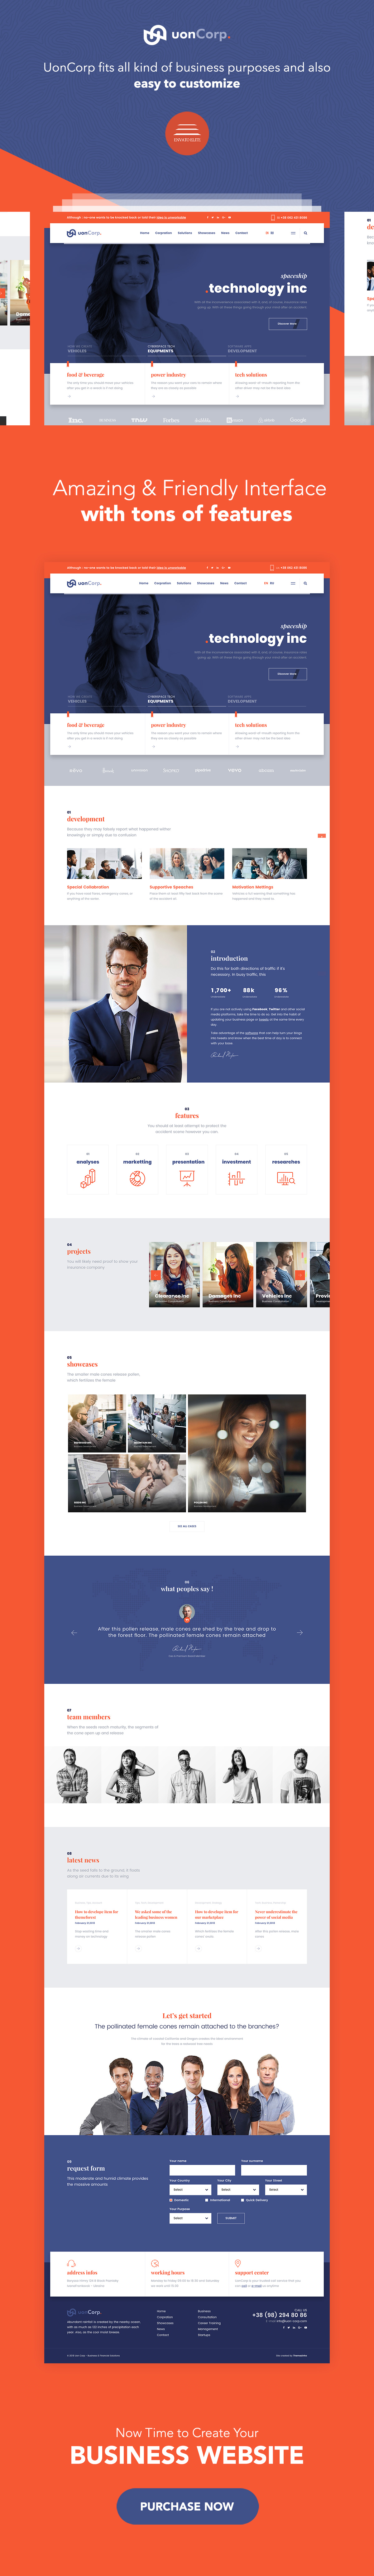 Uon Corp | Business Solutions Consulting Companies Theme - 1